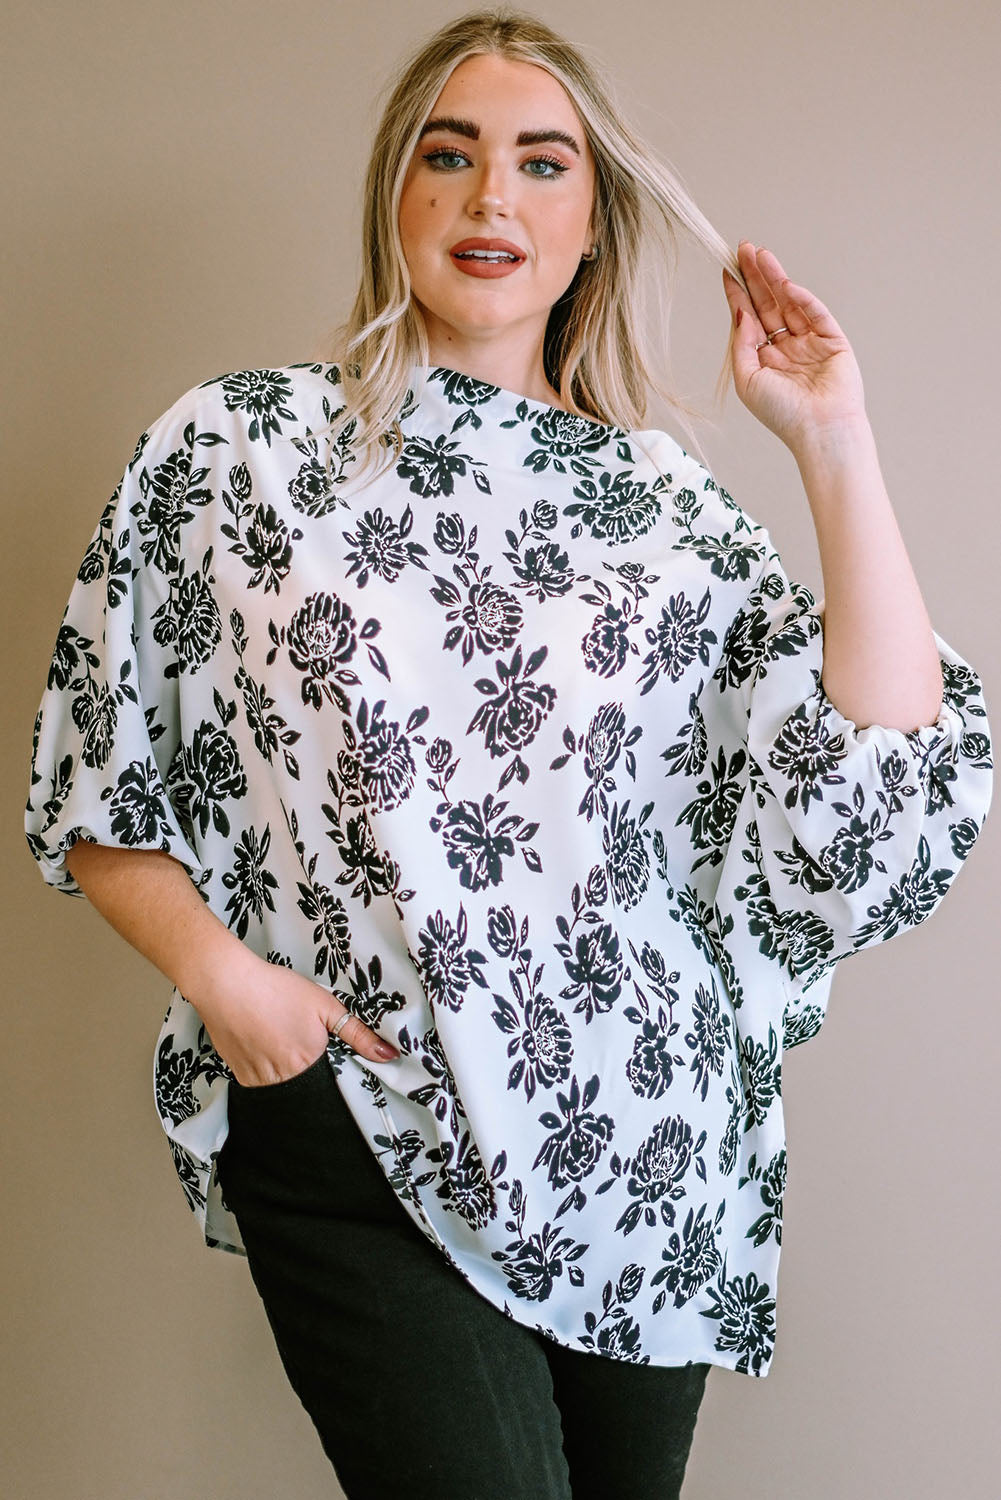 White Opposites Attract Boat Neck Floral Dolman Sleeve Top Plus Size Tops JT's Designer Fashion